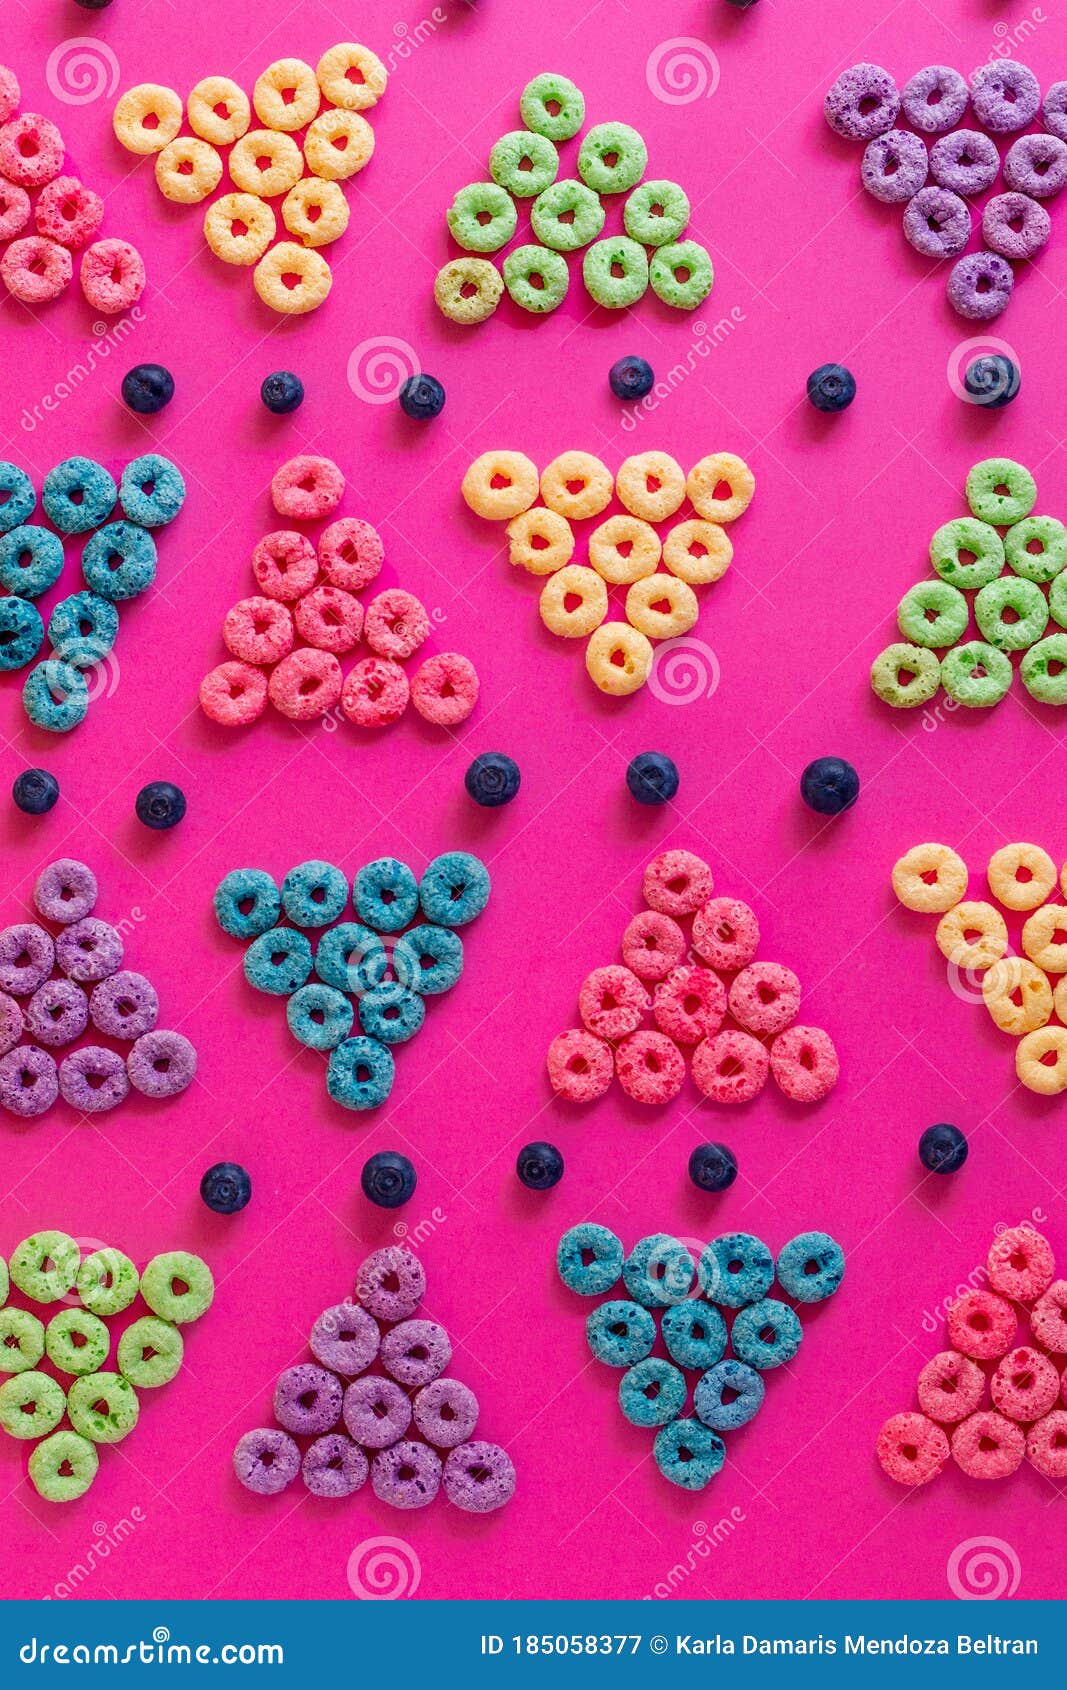 Froot Loops in the Shape of a Triangle Blue, Green, Purple, Pink